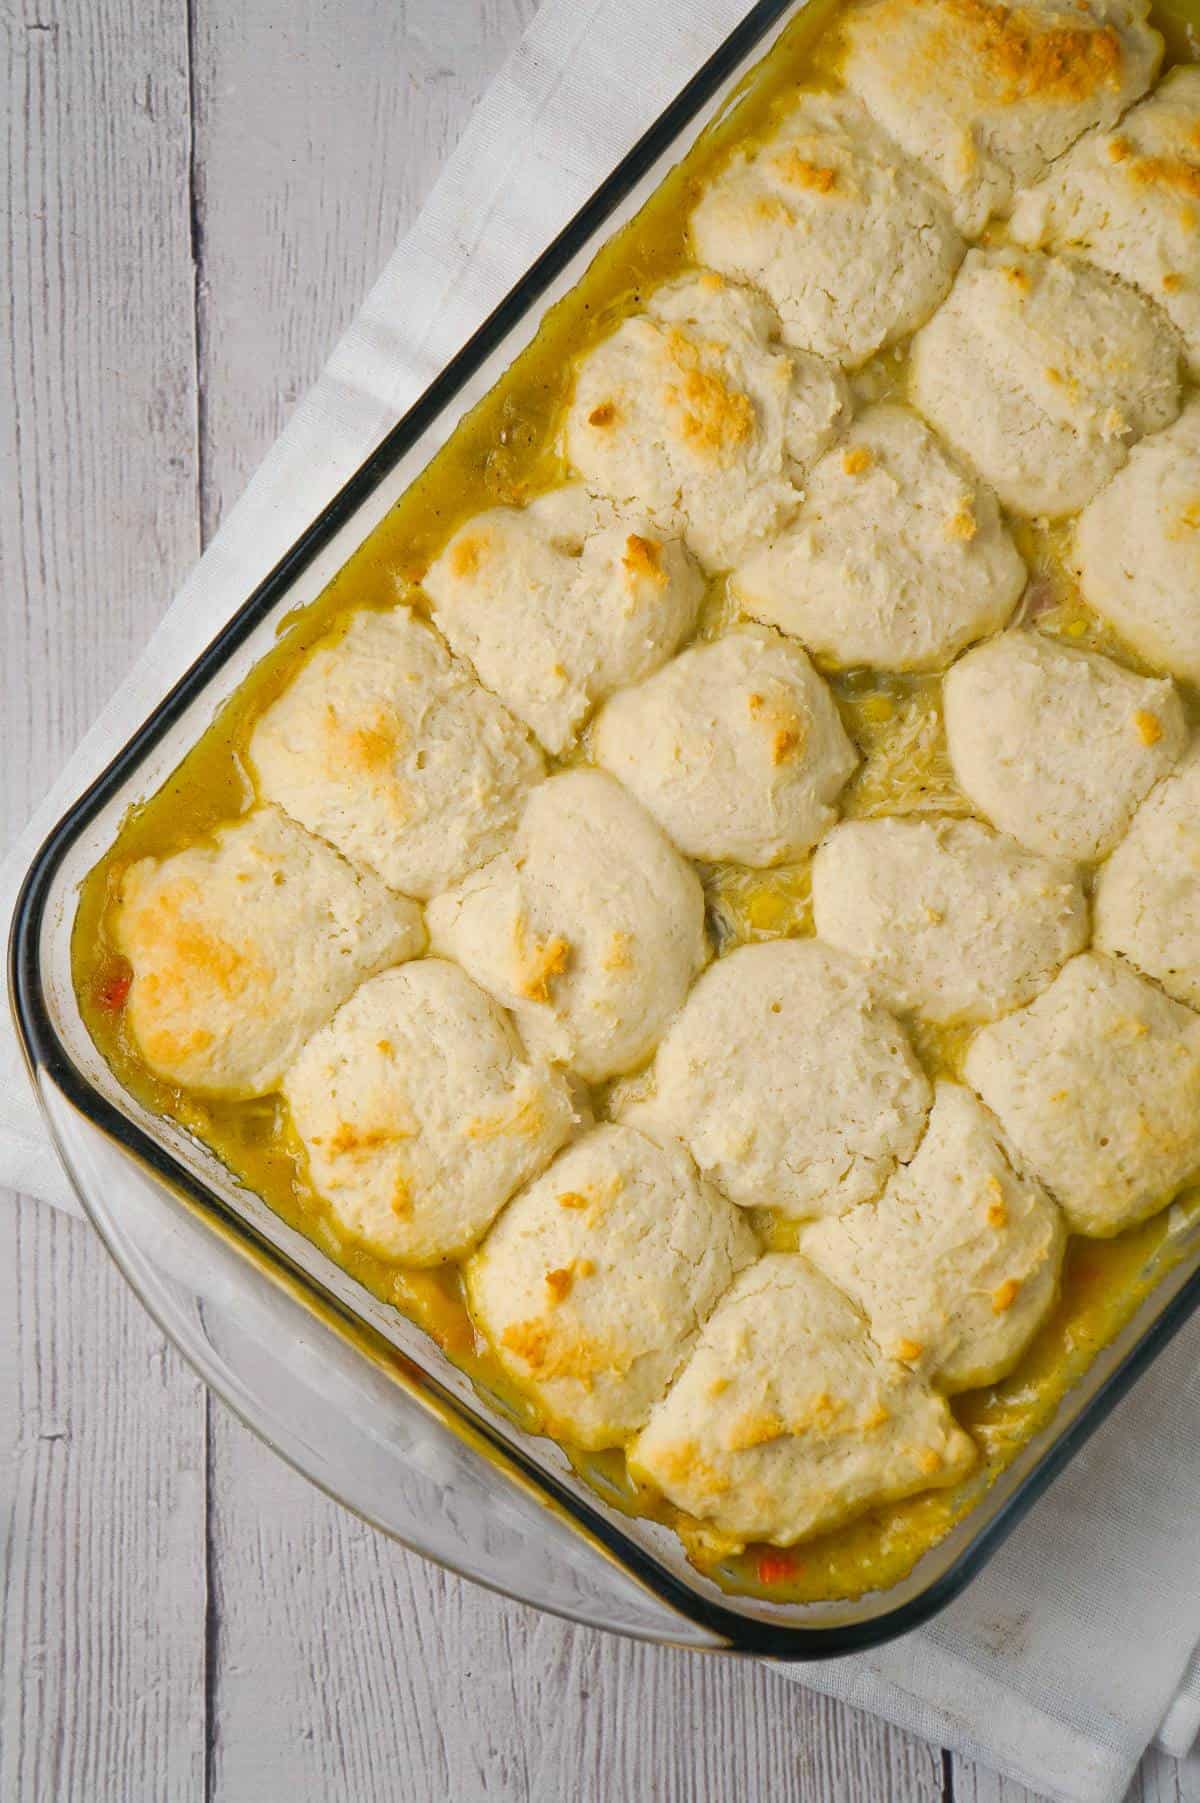 Chicken and Dumplings Casserole is an easy dinner recipe using shredded rotisserie chicken, cream of chicken soup, canned veggies and Bisquick.